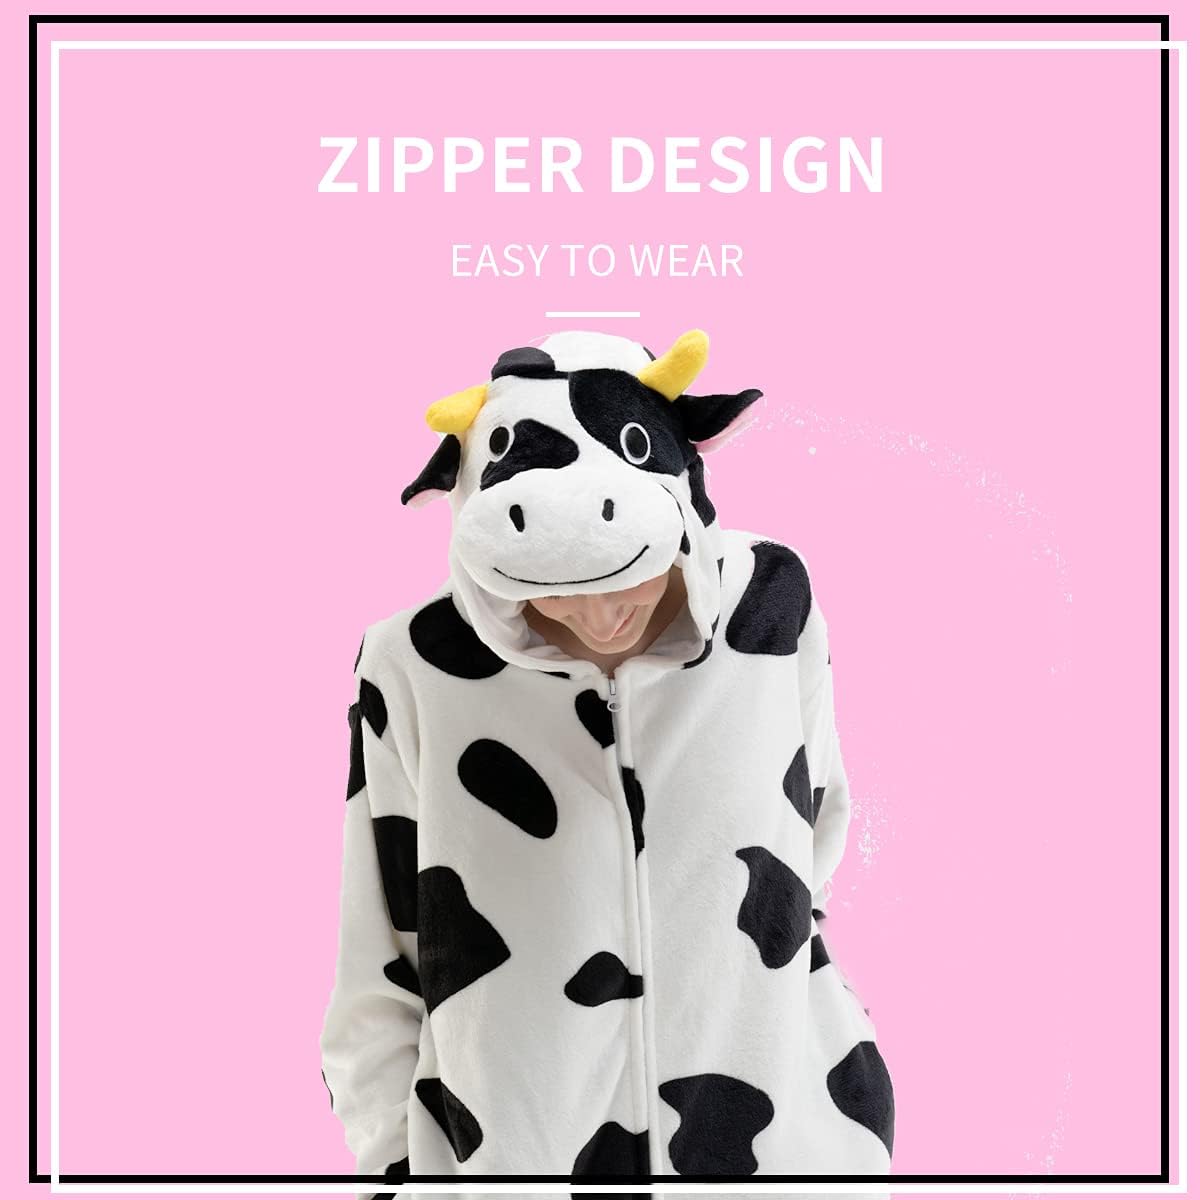 Unisex Babies Cow Cosplay Animal Onesie Pajamas Within 24 Months